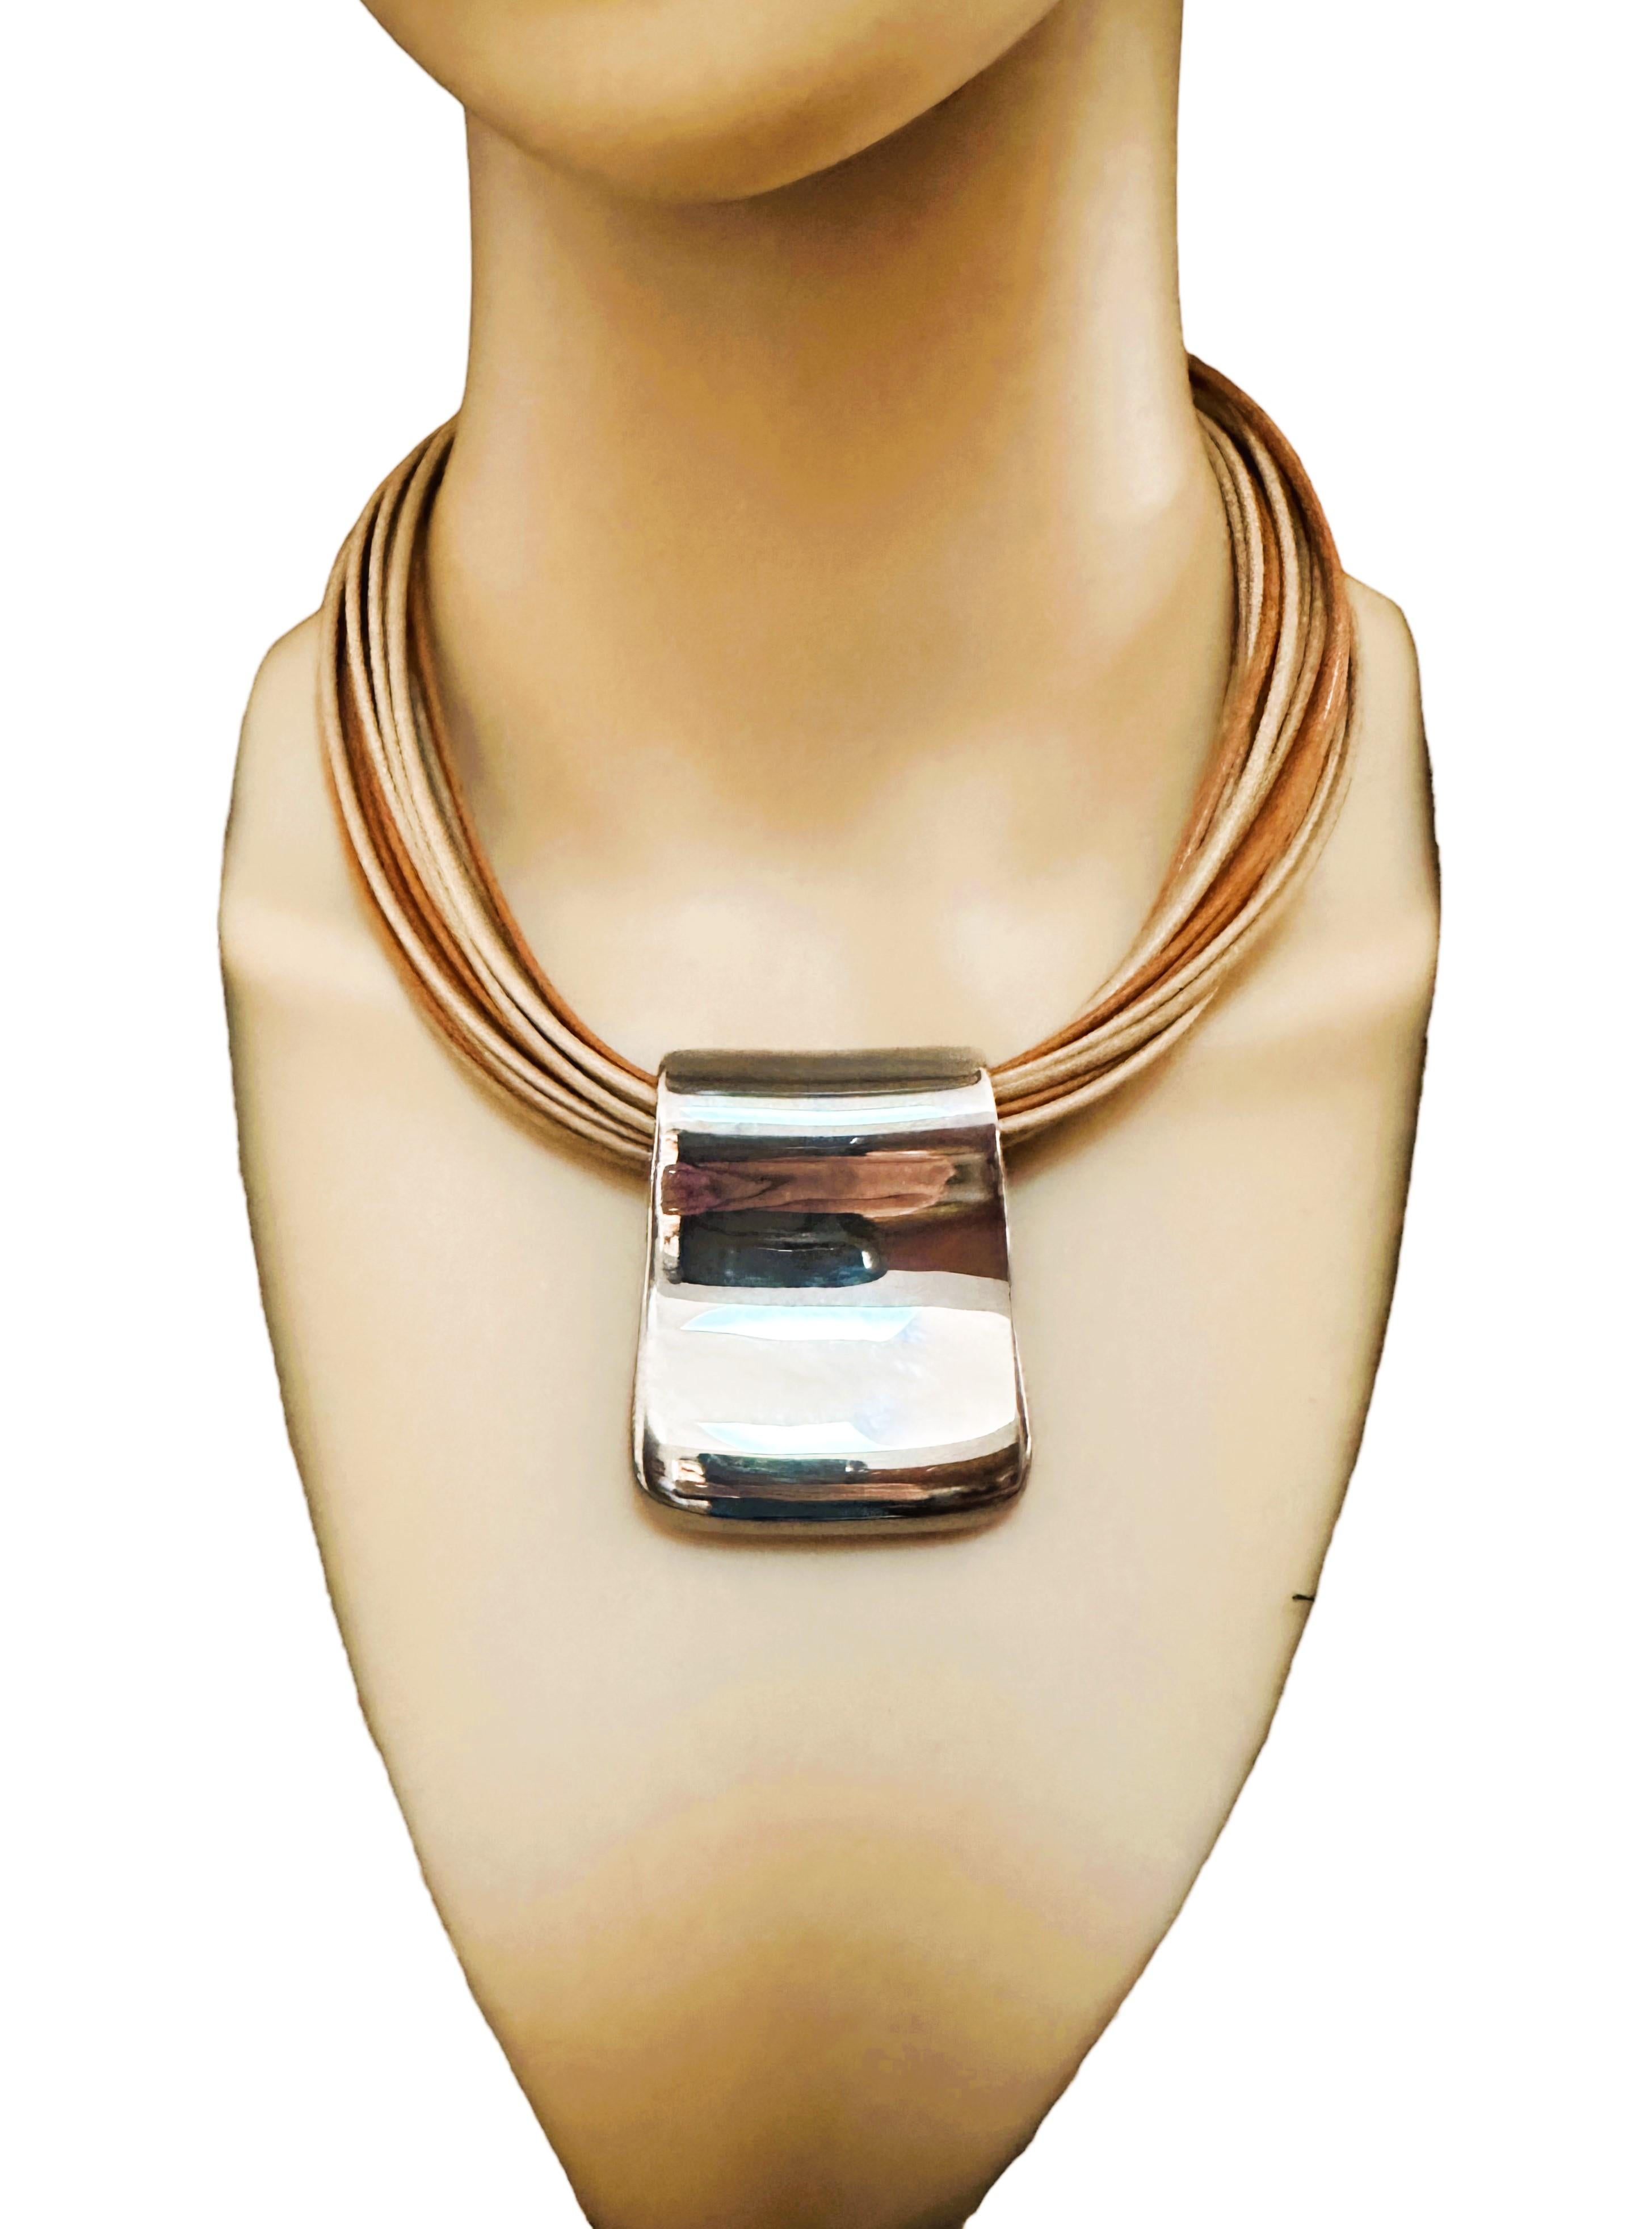 Italian Milor Italy Leather Strand Necklace with Sterling Pendant For Sale 1